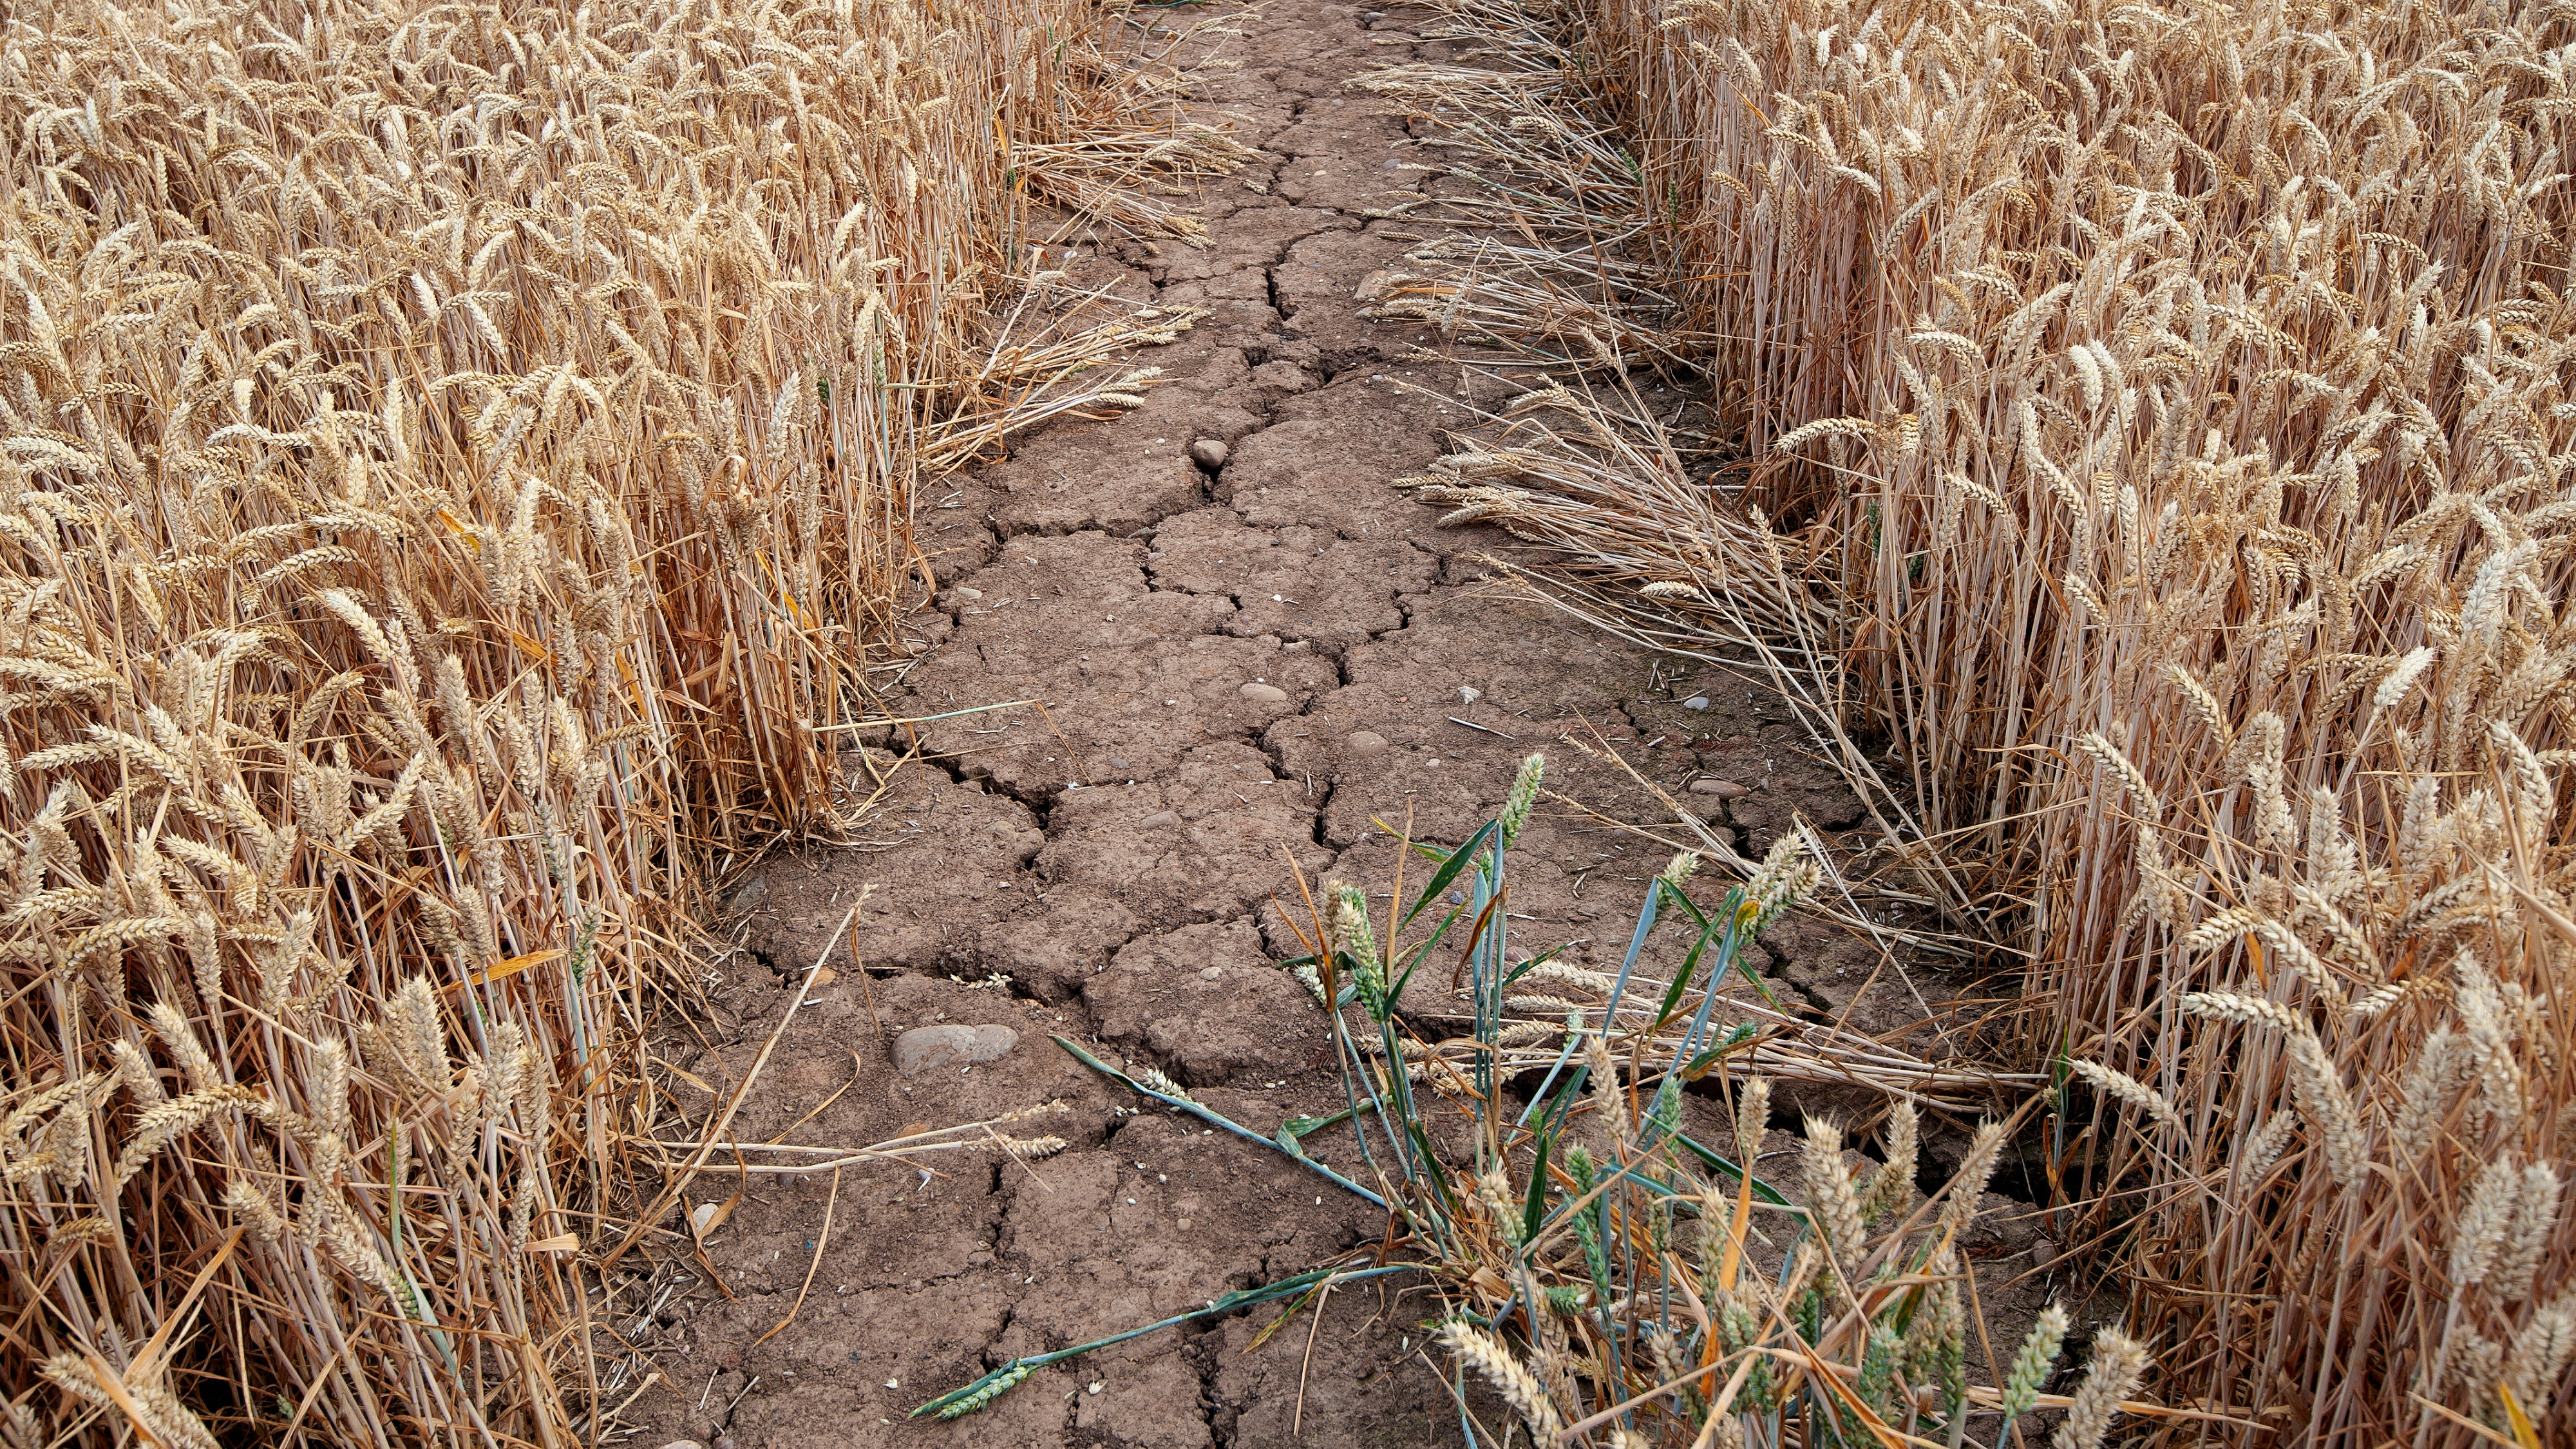 Cracked earth in a field after drought